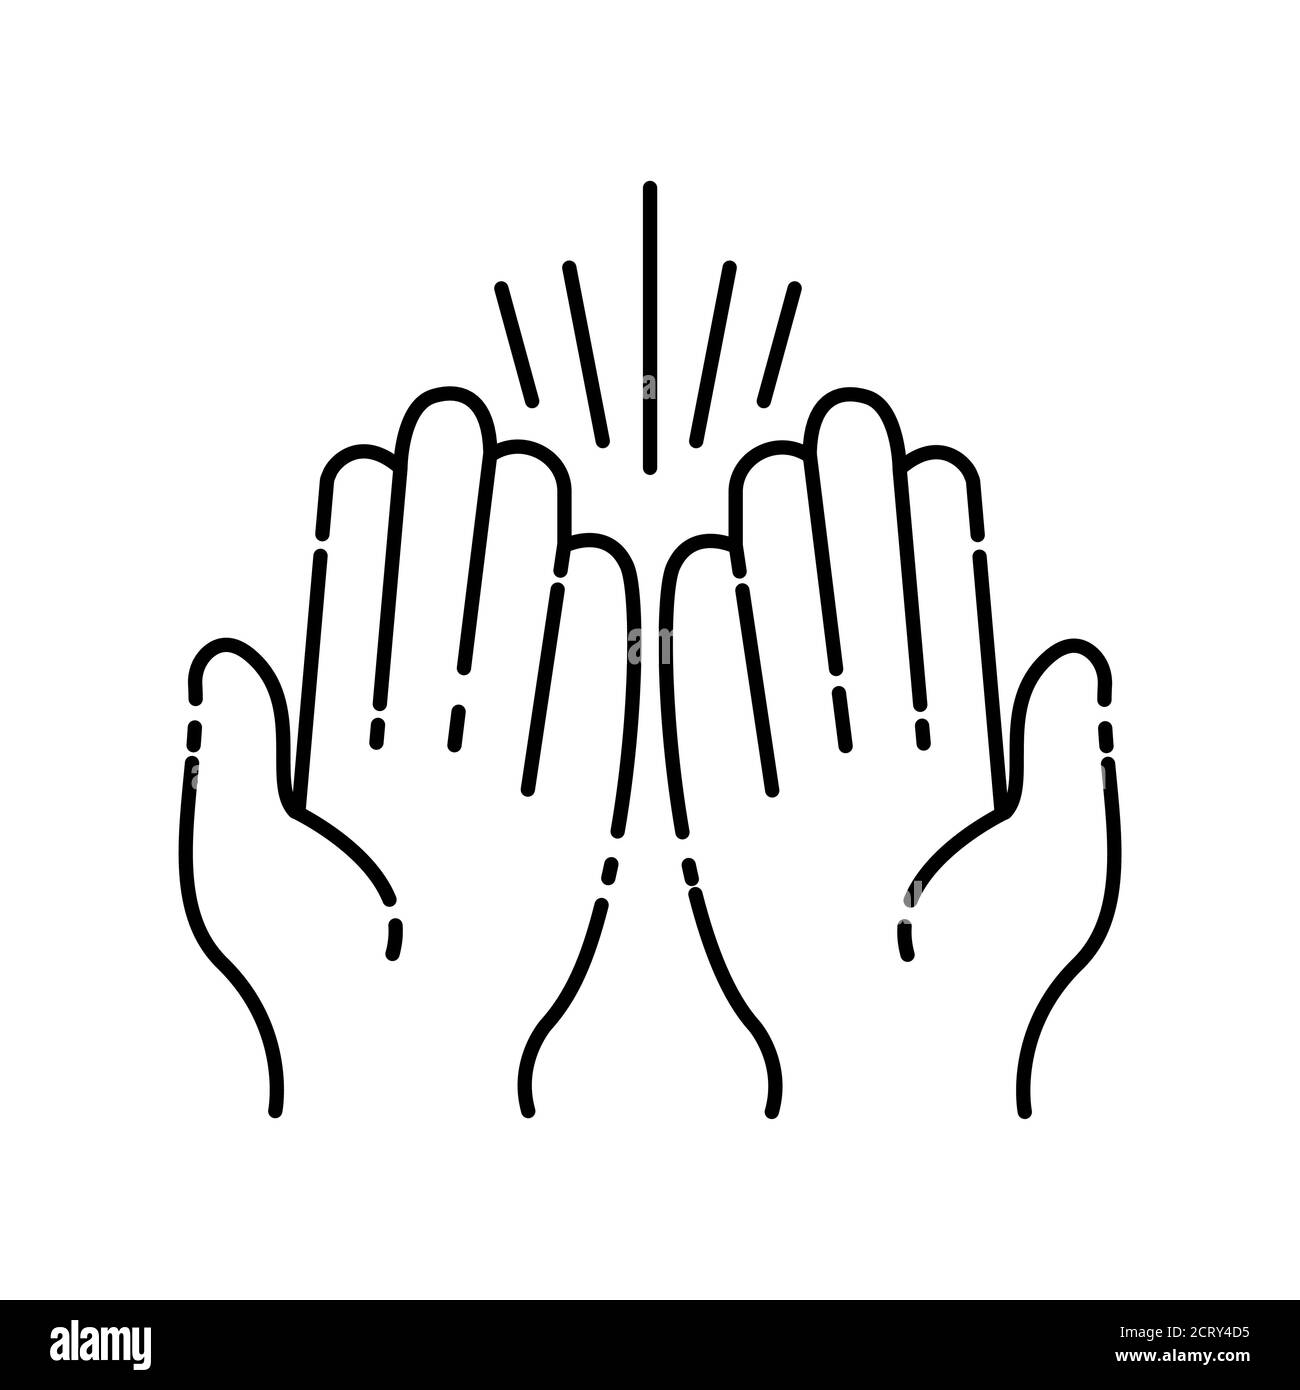 Praying hands black line icon. Prayer to god with faith and hope. Pictogram for web page, mobile app, promo. UI UX GUI design element. Editable stroke Stock Vector